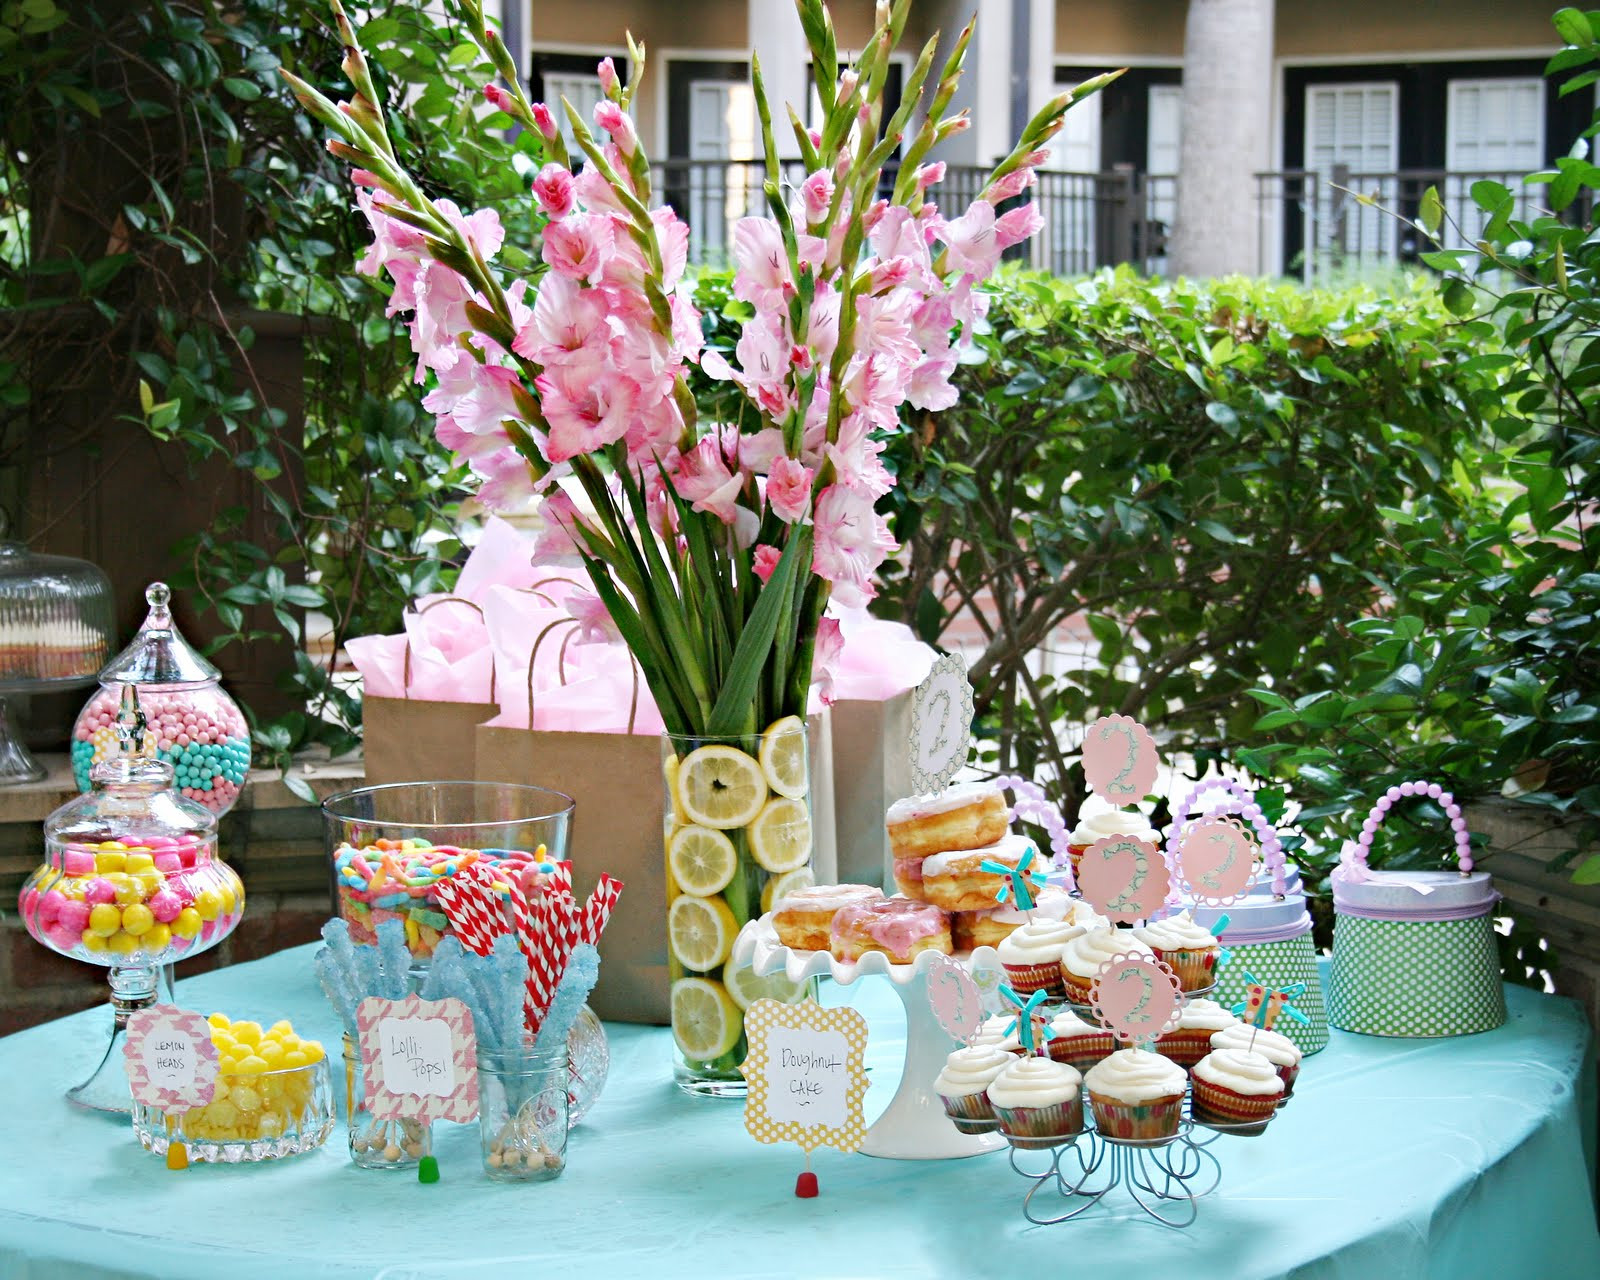 Sweet 16 Birthday Pool Party Ideas
 Cook Bake & Decorate Girly Pool Party